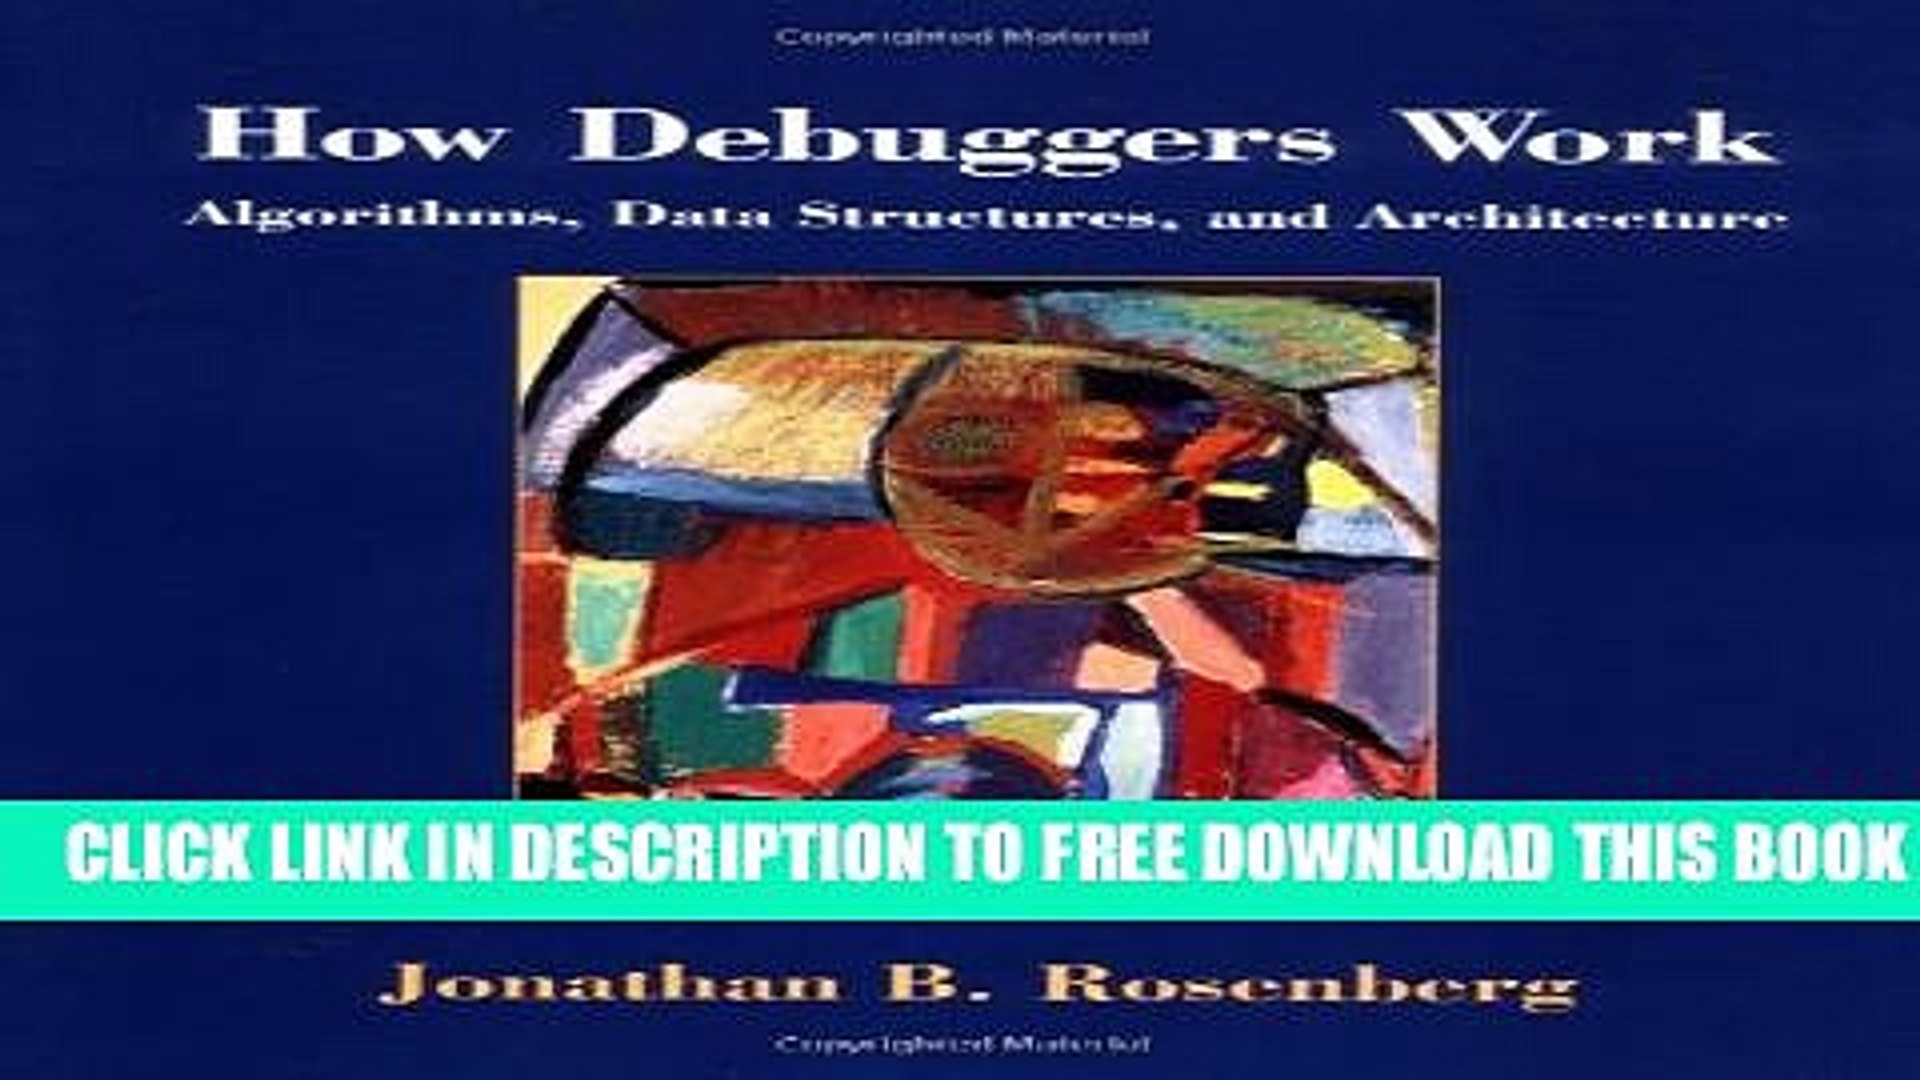 Collection Book How Debuggers Work: Algorithms, Data Structures, and Architecture